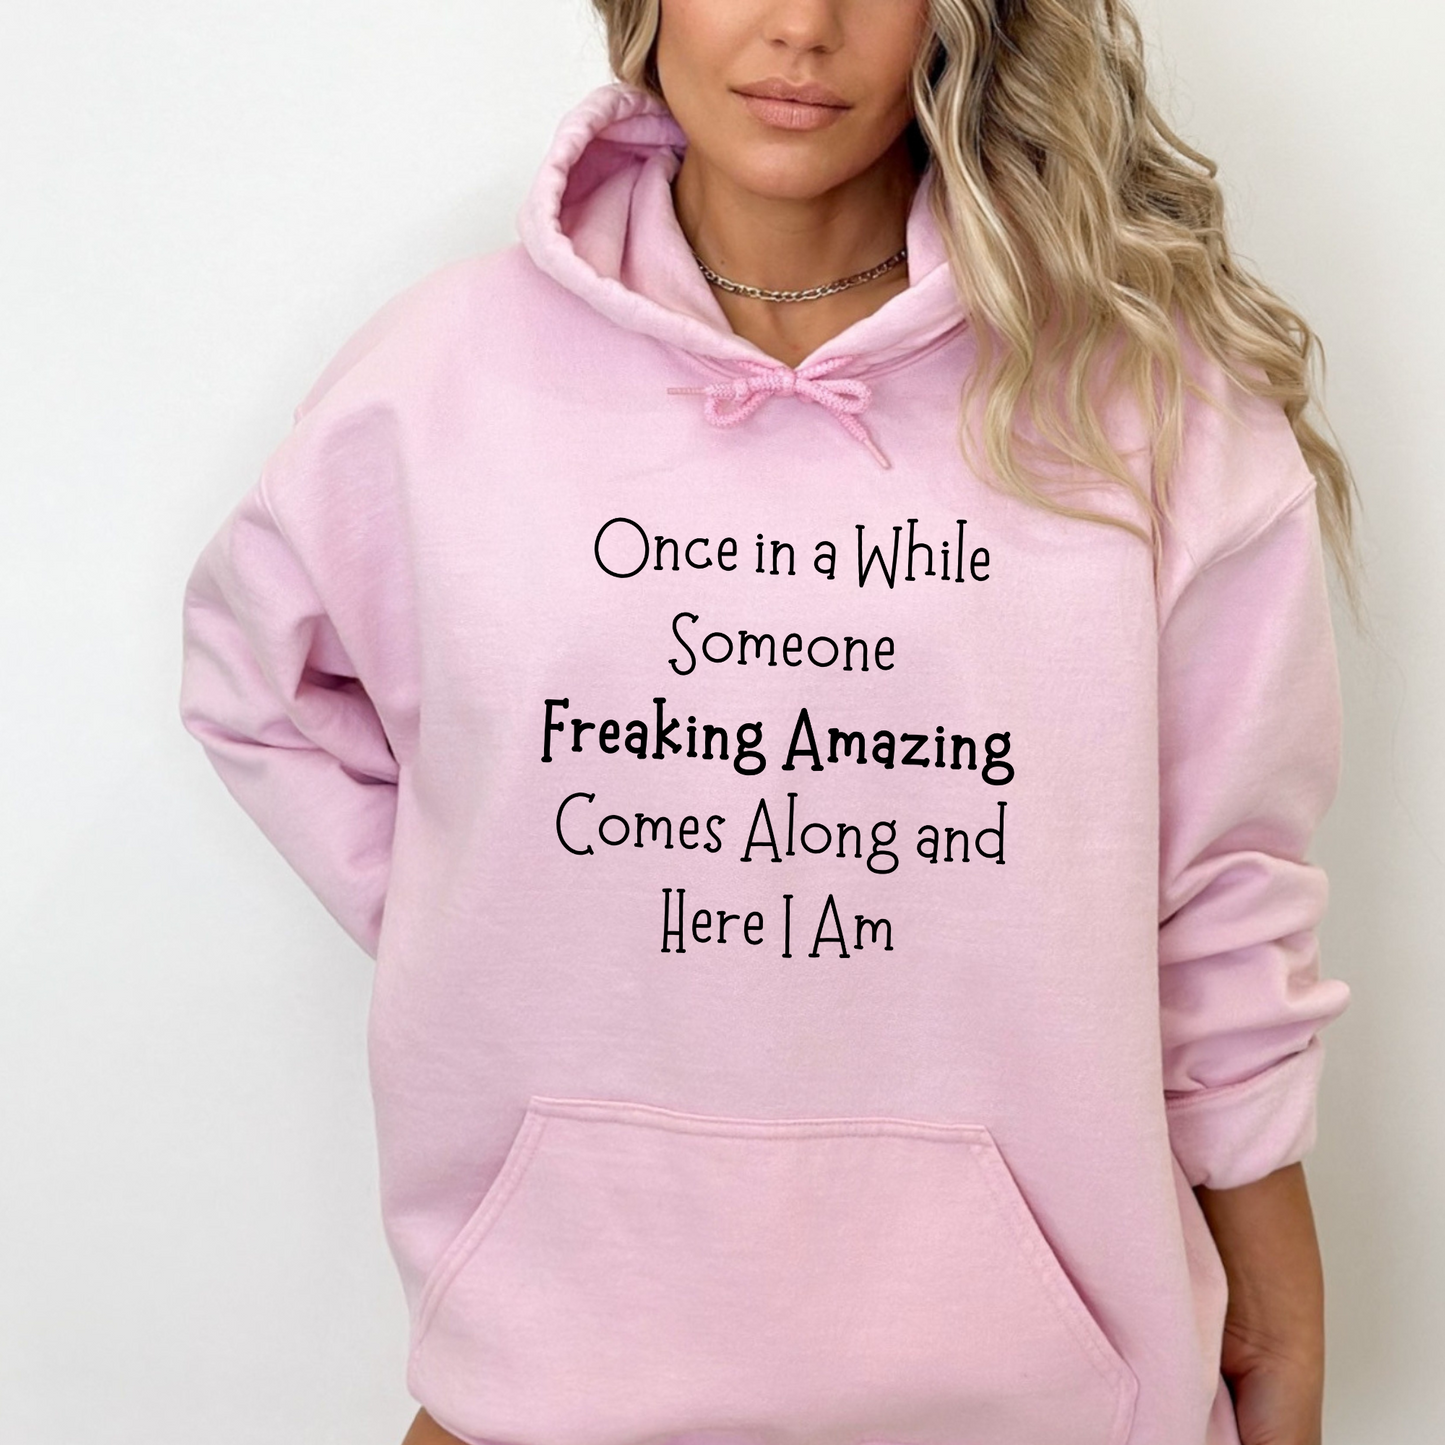 Once In a While Someone Freaking Amazing Comes Along and Here I Am Pullover Hoodie